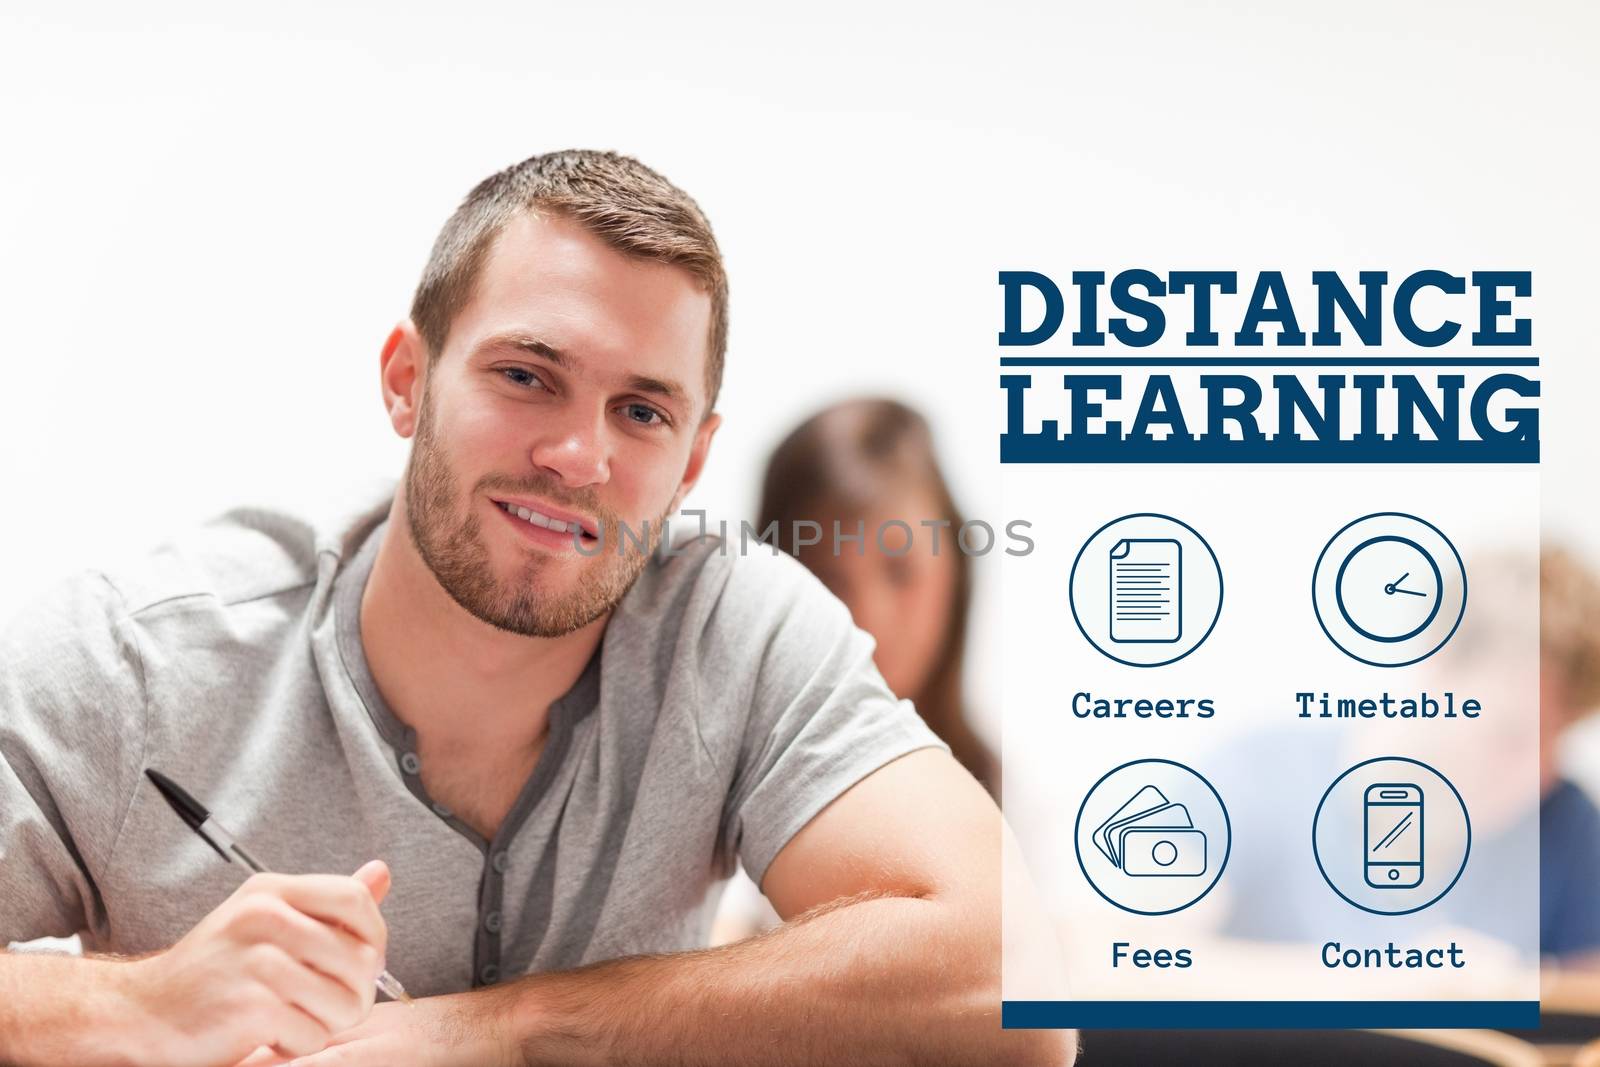 Digital composite of Education and distance learning text and icons and man sitting